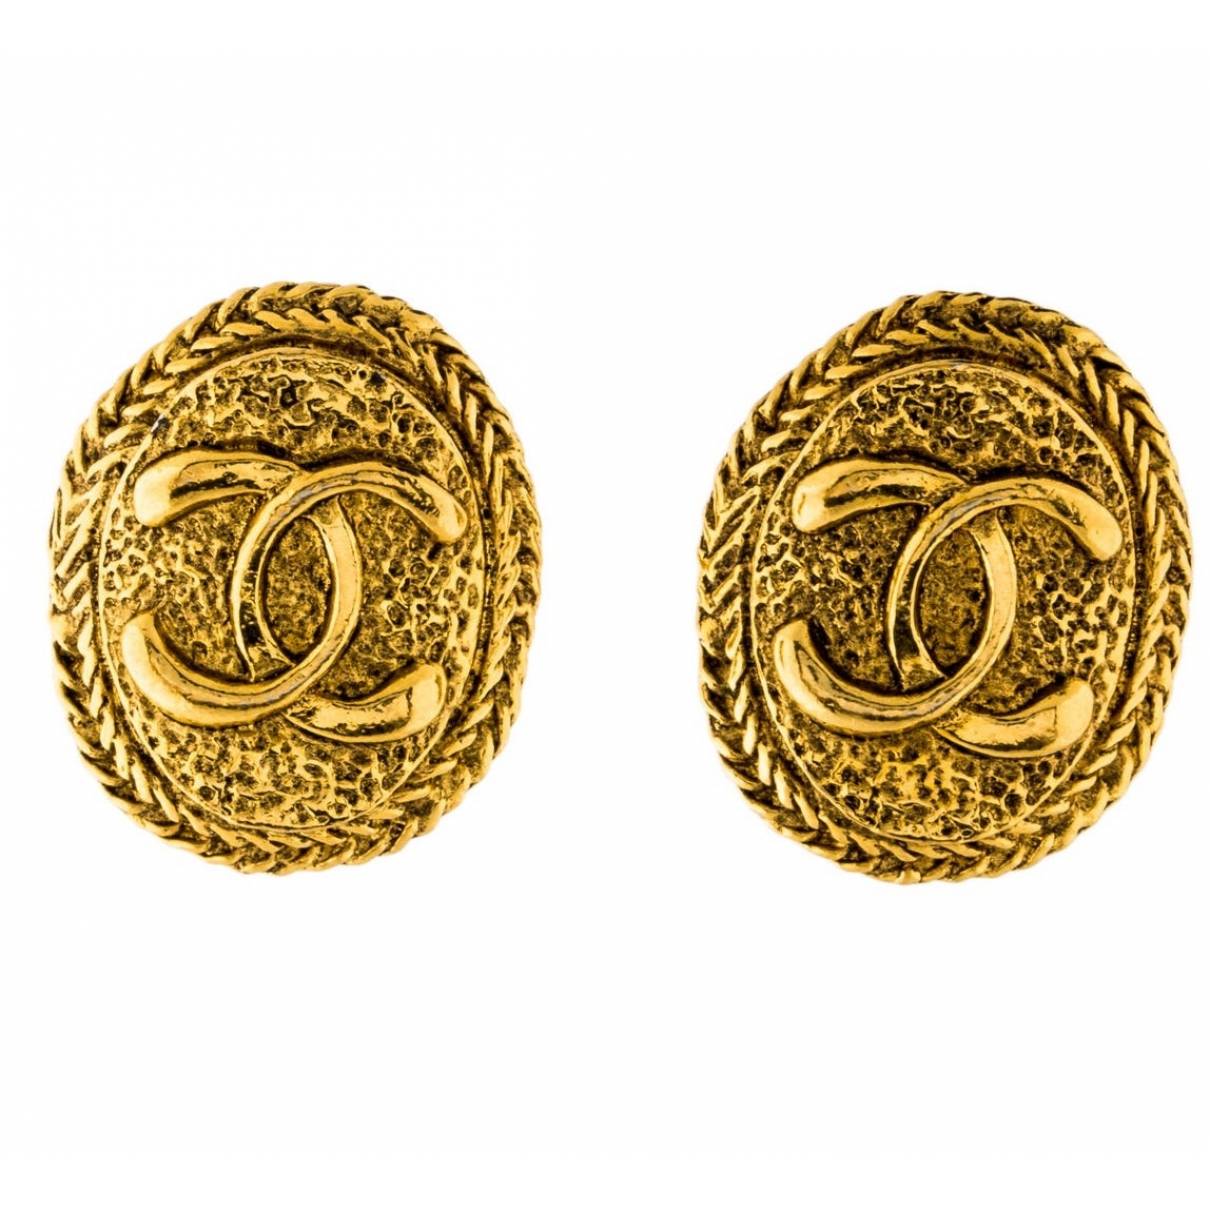 Chanel - Authenticated Earrings - Metal Gold for Women, Very Good Condition